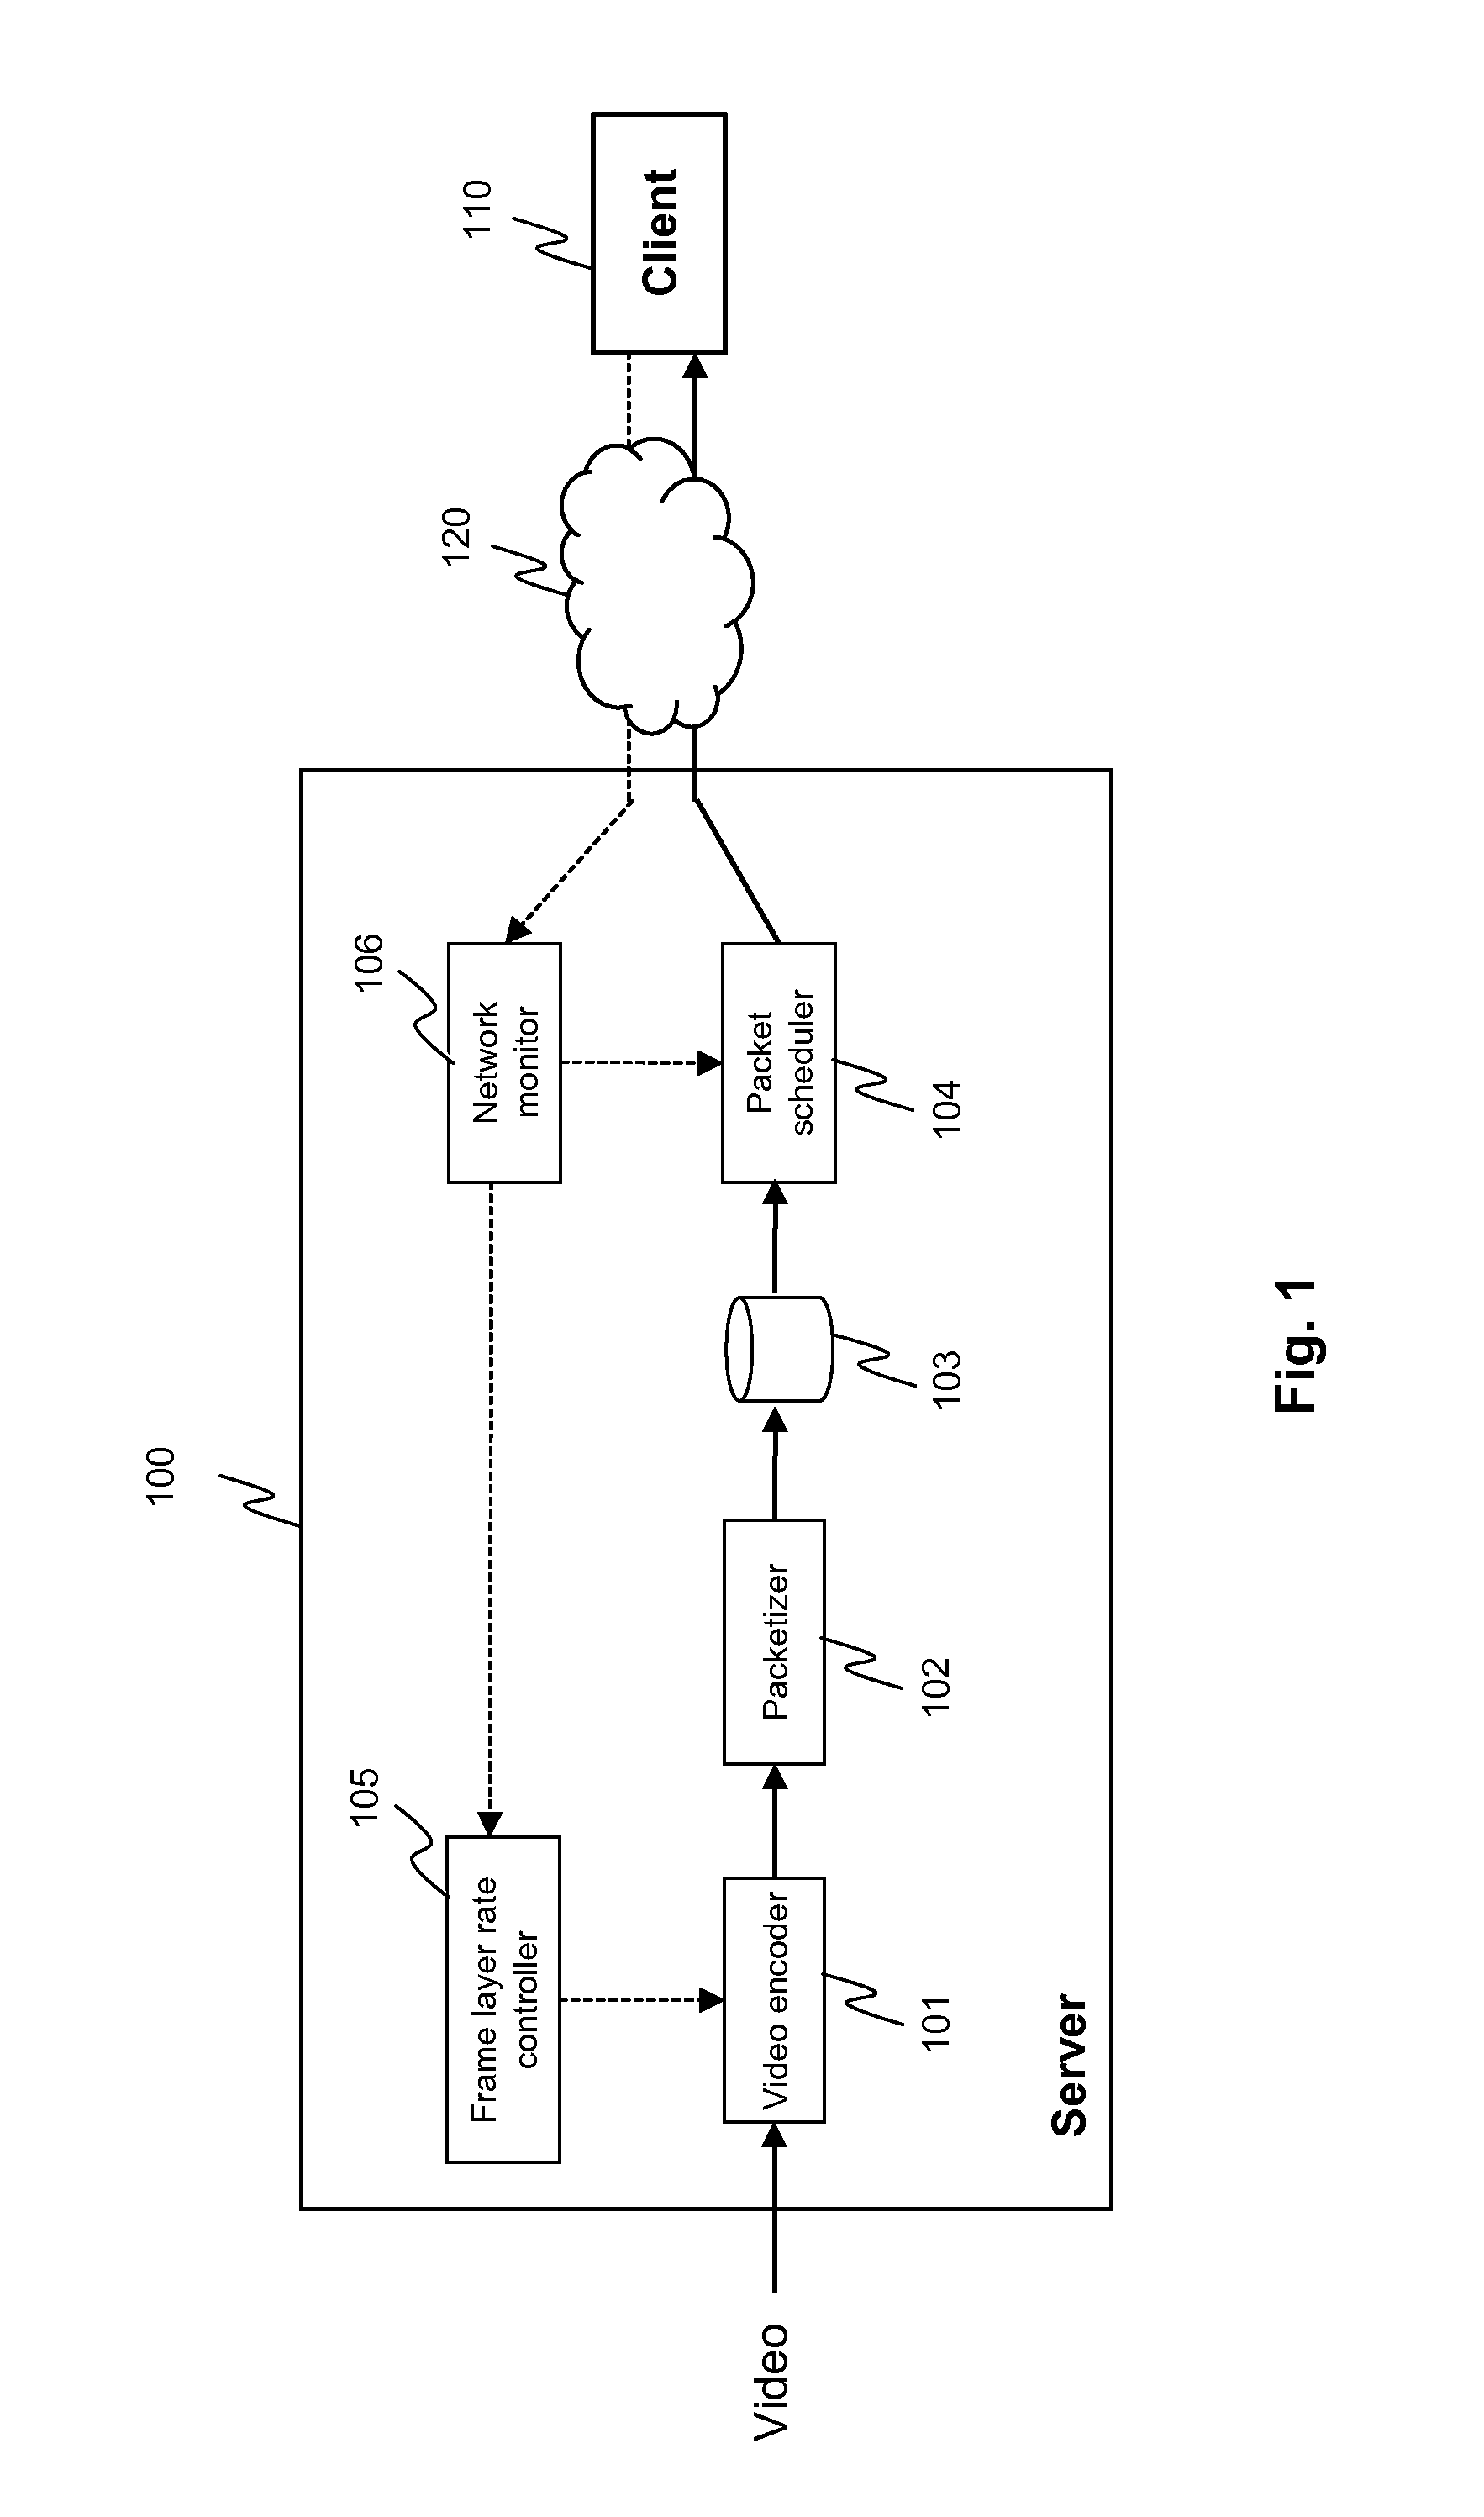 Encoding of a video frame for transmission to a plurality of clients